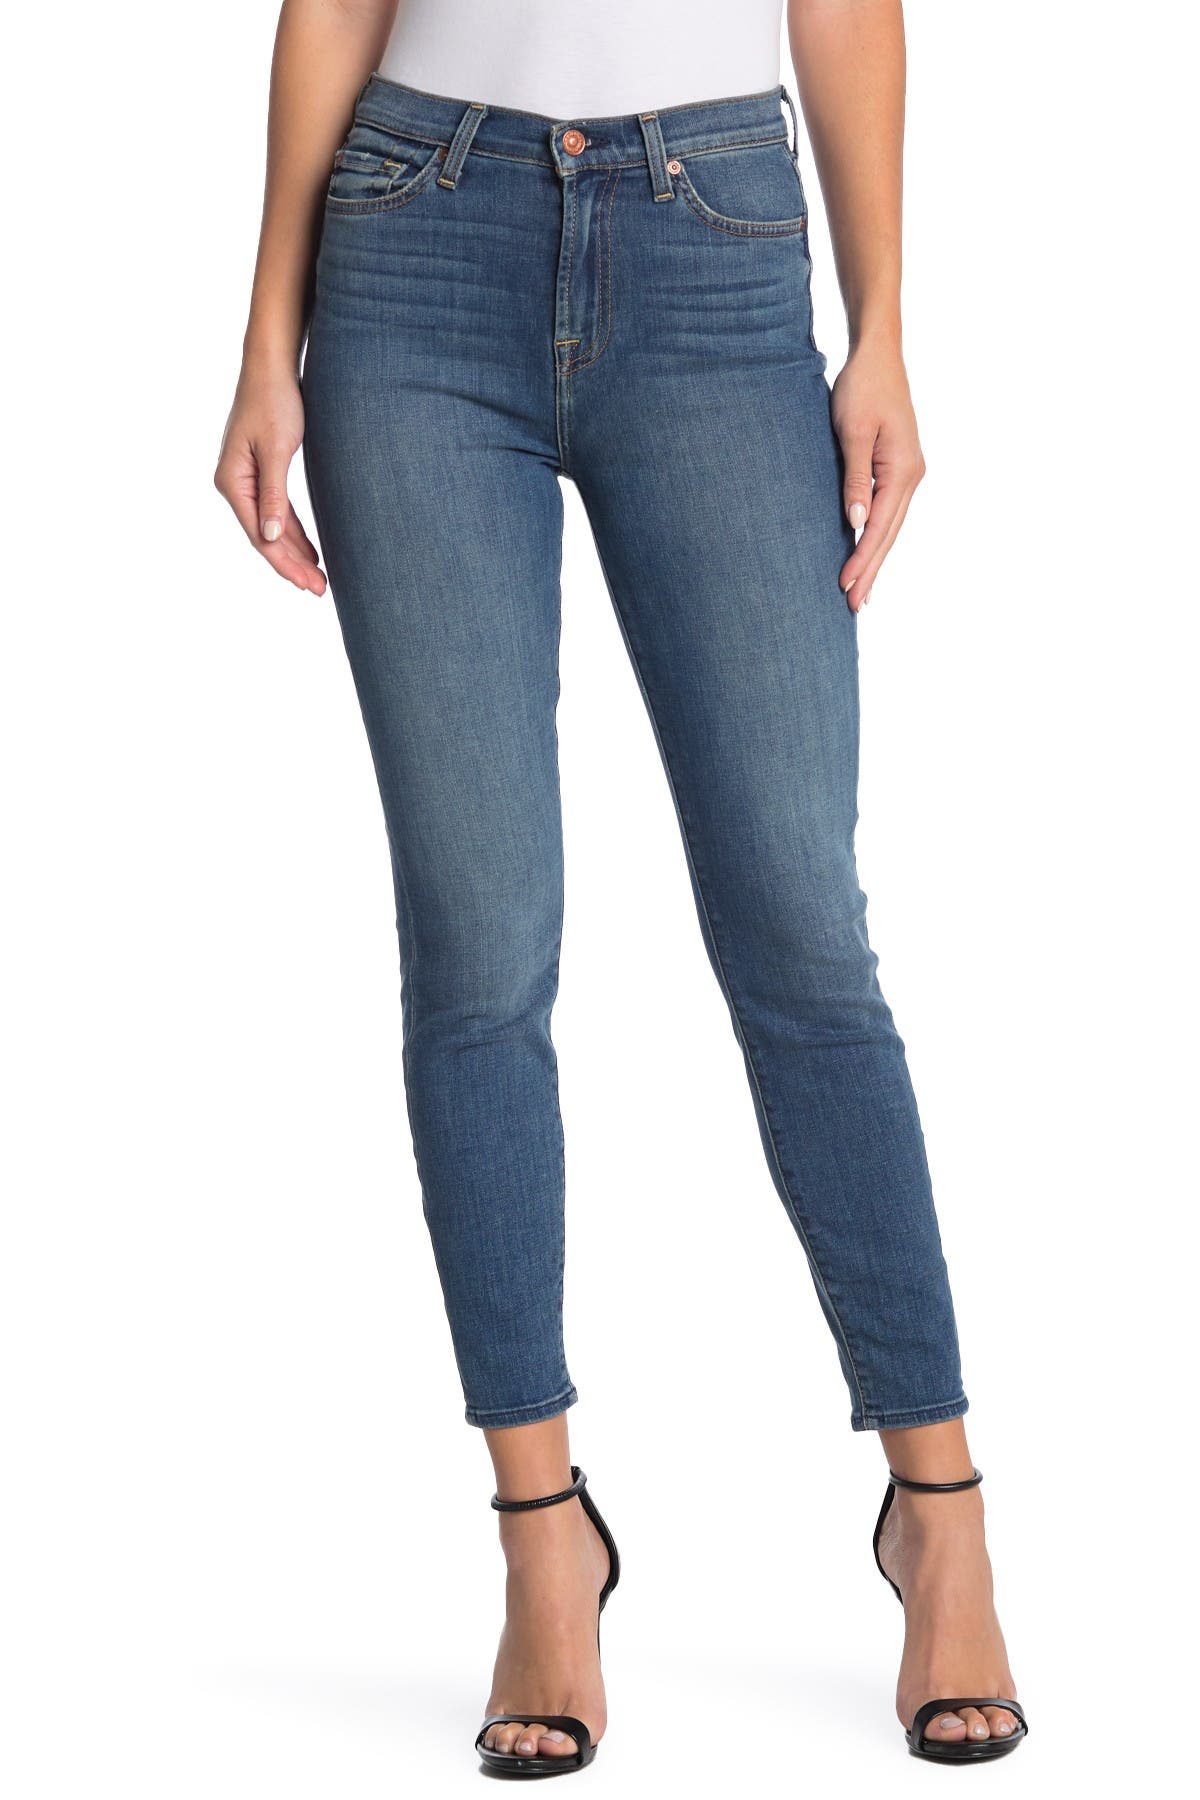 gwenevere jeans